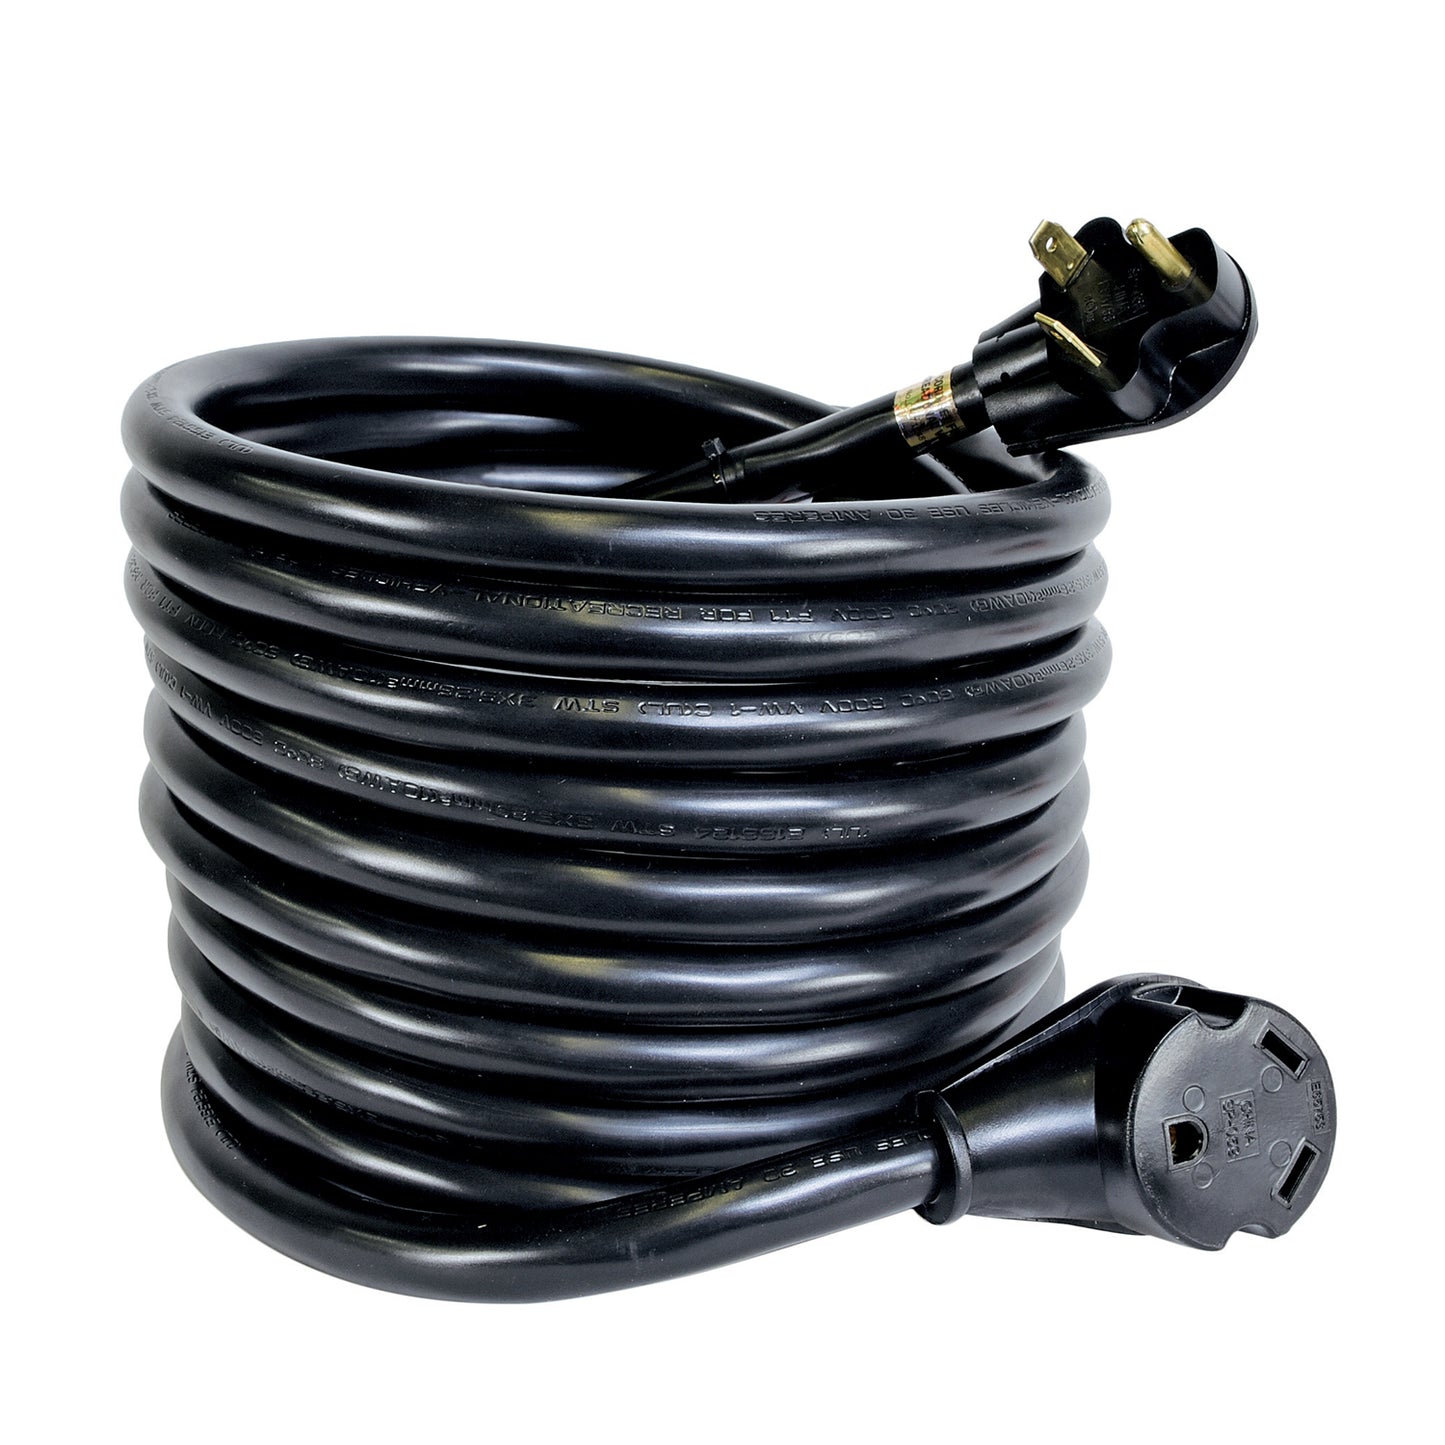 ARCON - 14249: EXTENSION CORD 30A 50FT